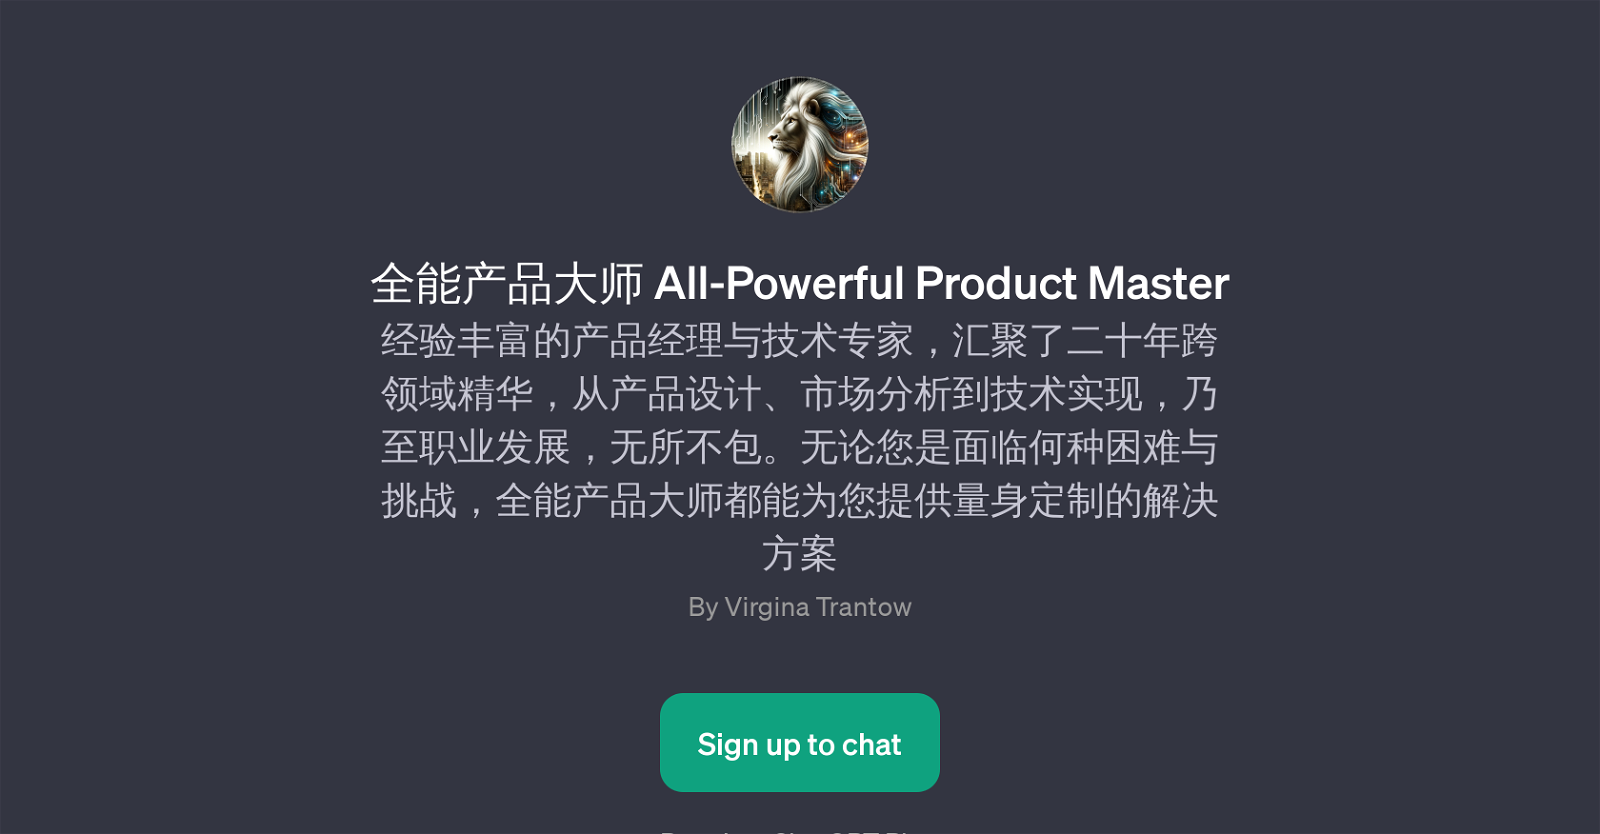 All-Powerful Product Master () website